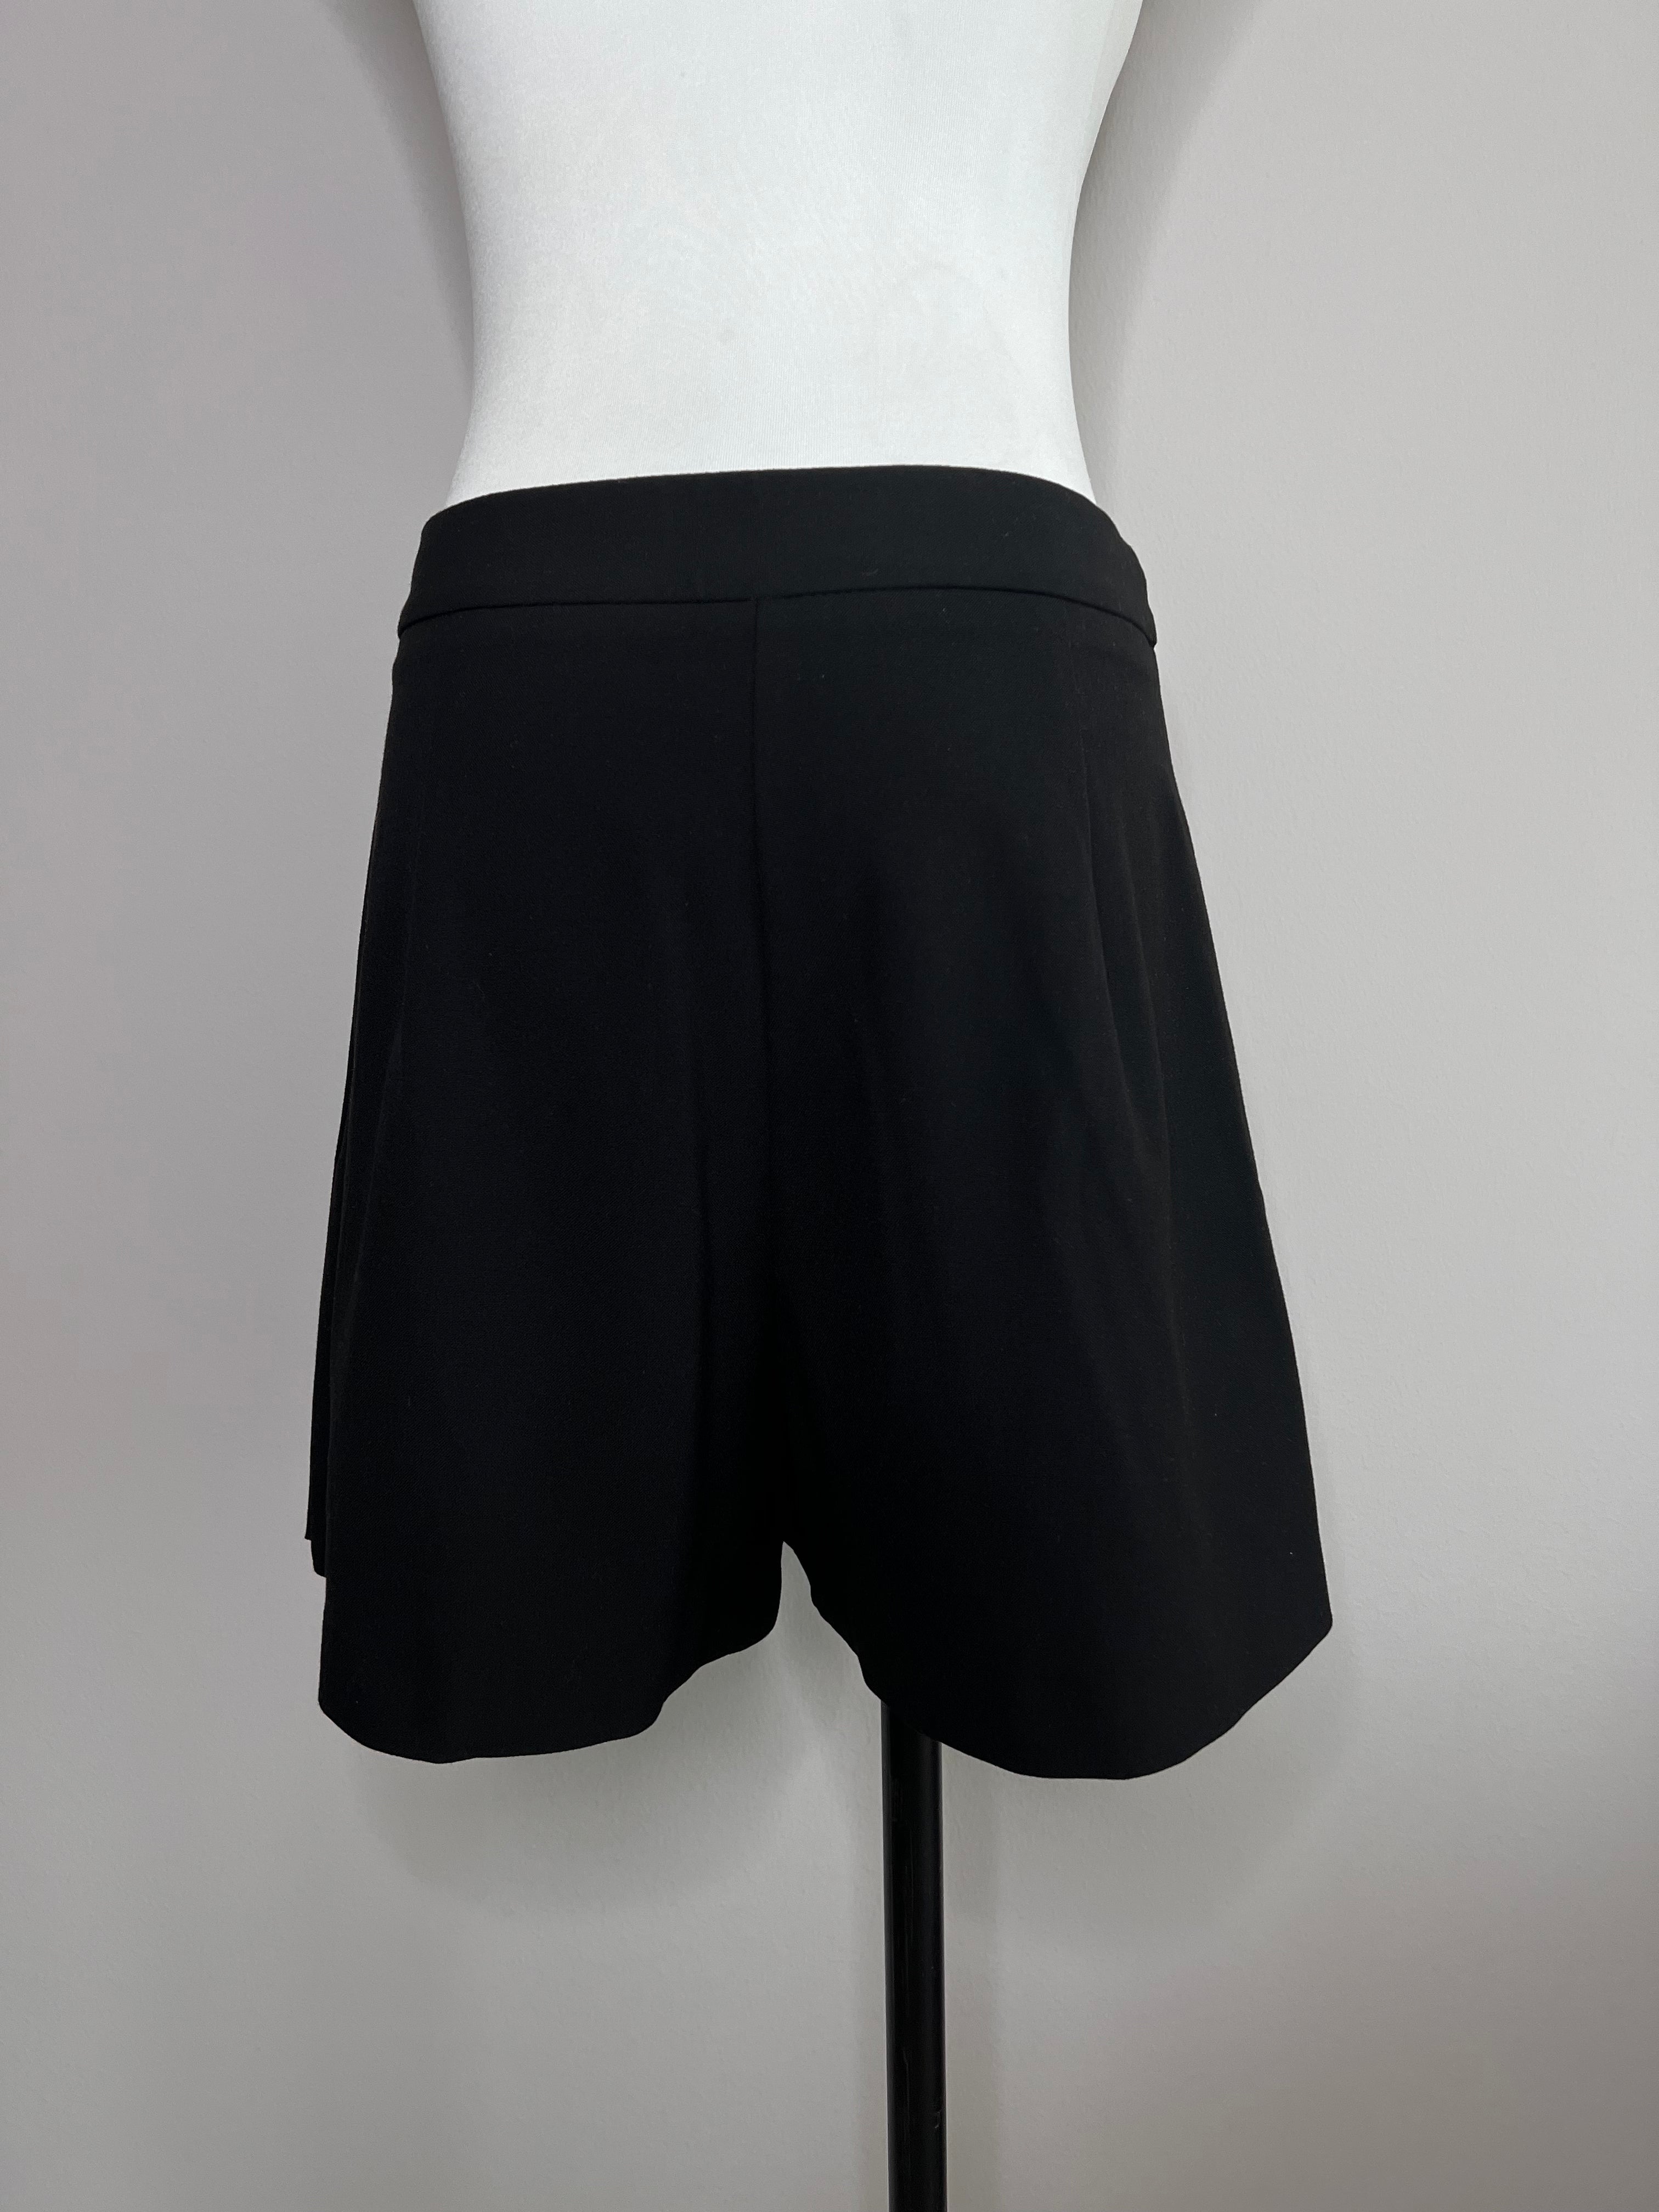 Pleated mini black skirt with gold button on the right - ZARA